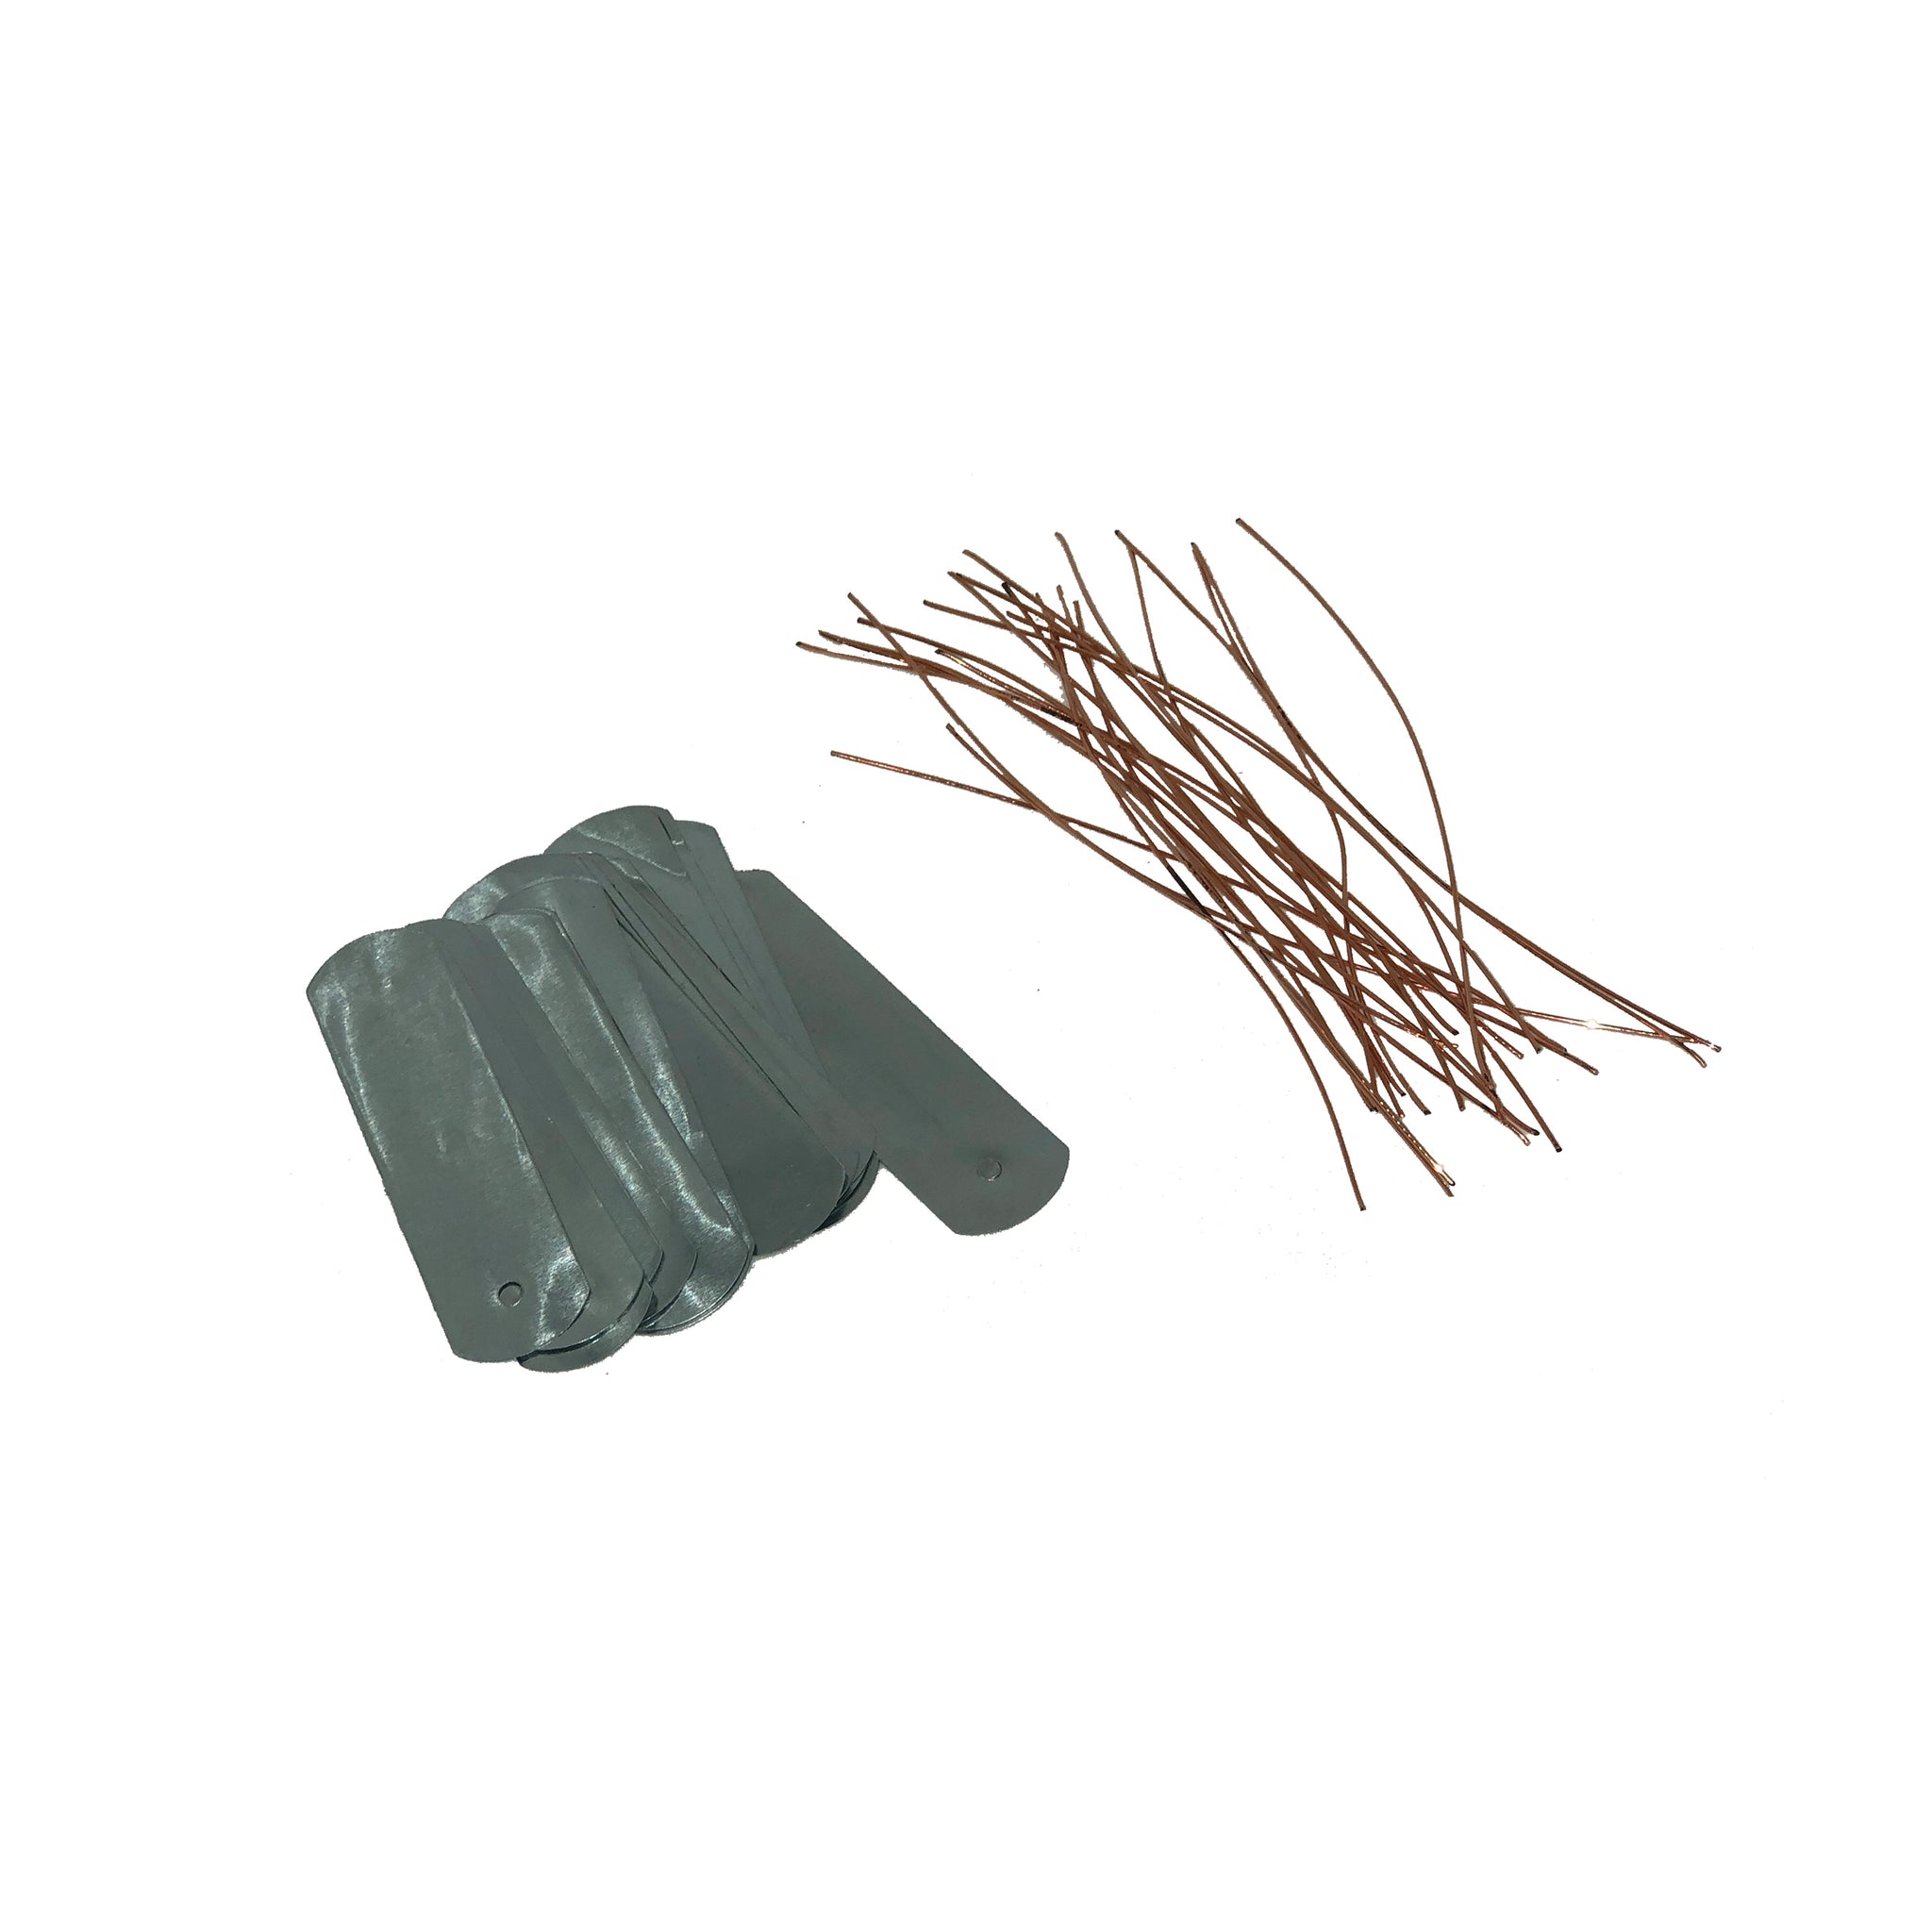 Beaver Snares 3/32 7x7 60 Inches HOT survival item $15.99